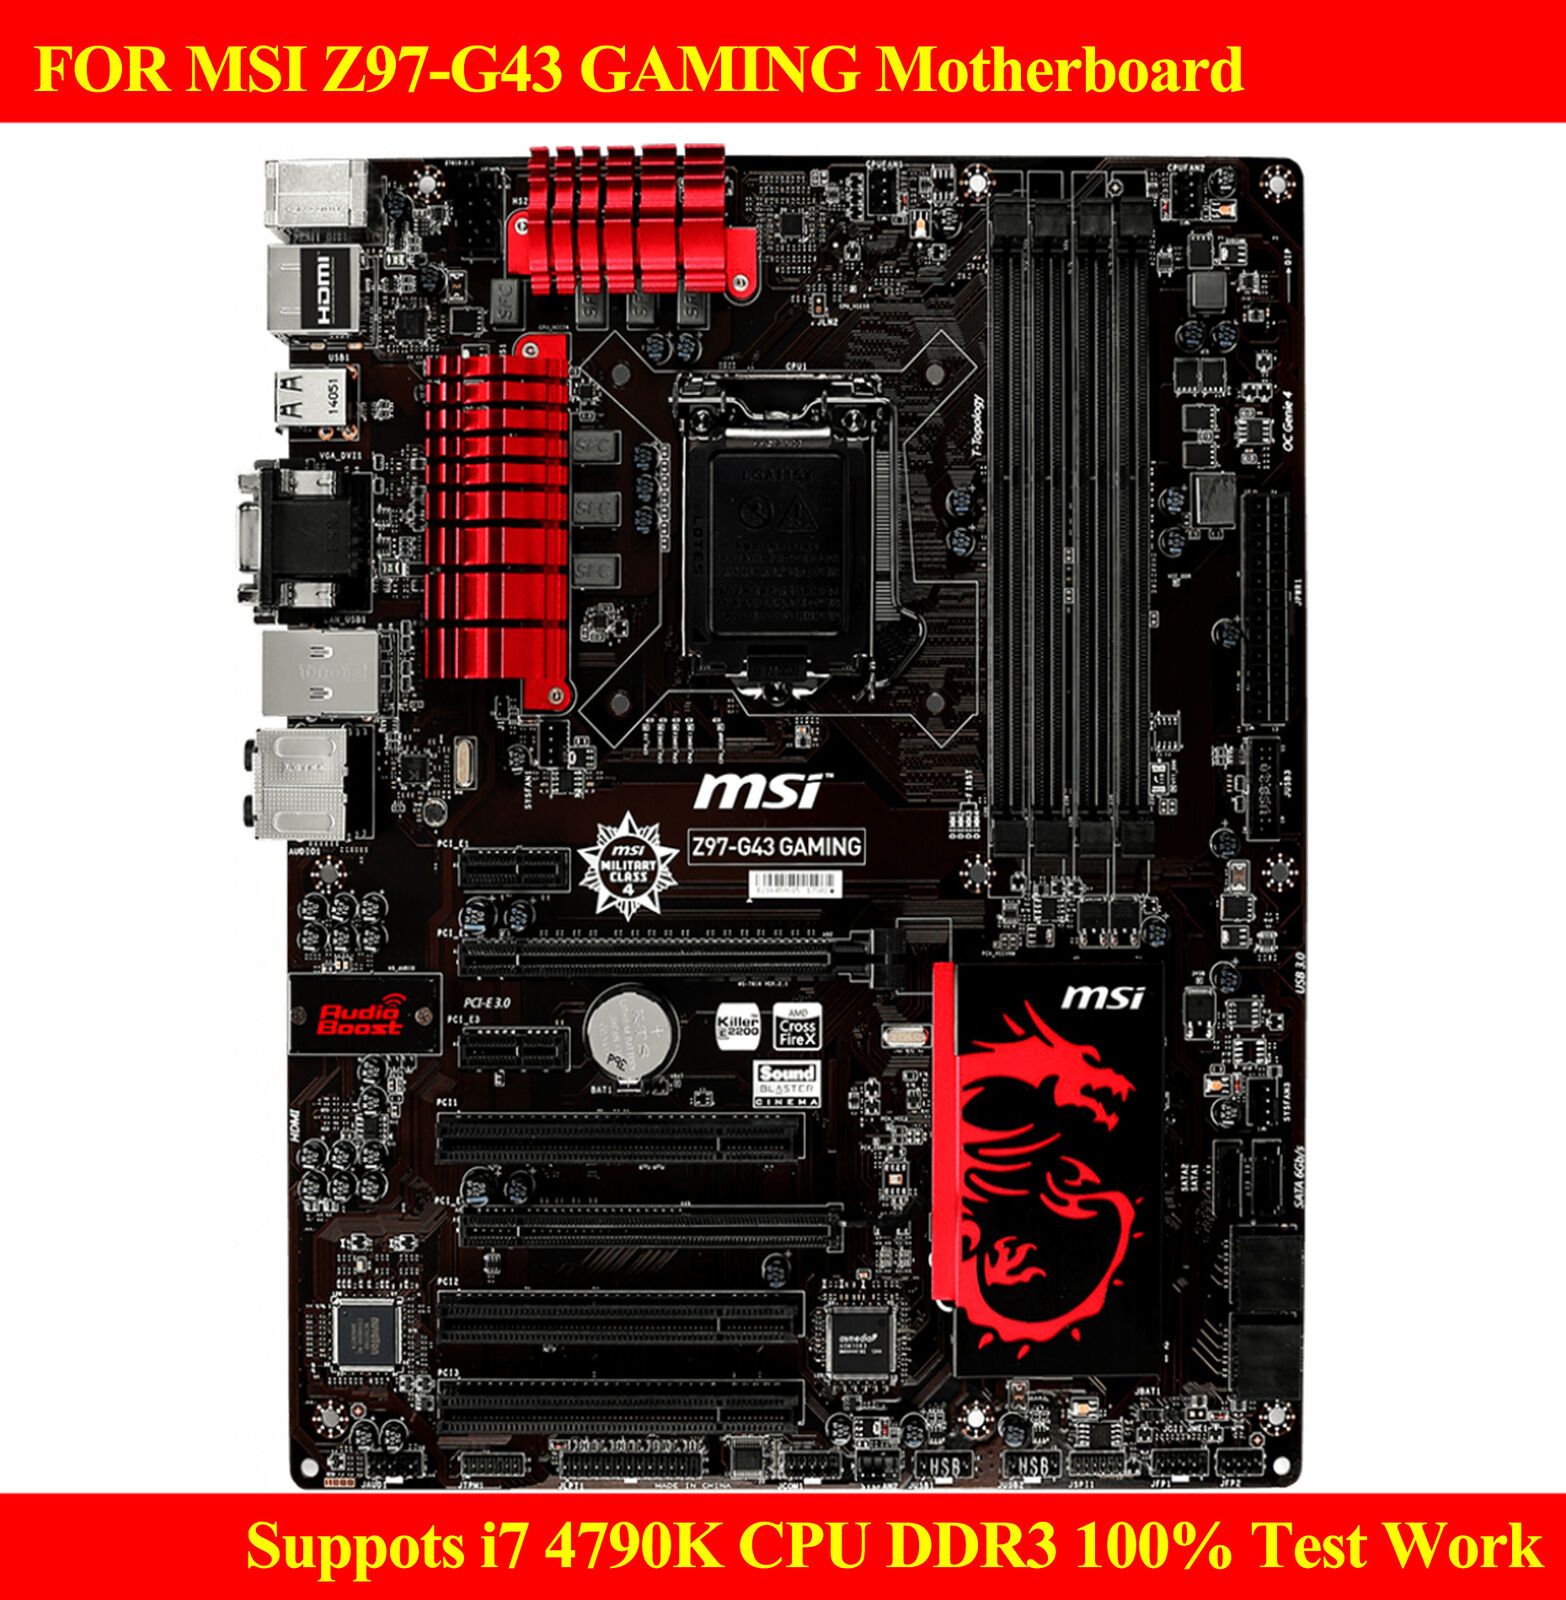 FOR MSI Z97-G43 GAMING Motherboard Suppots i7 4790K CPU DDR3 100